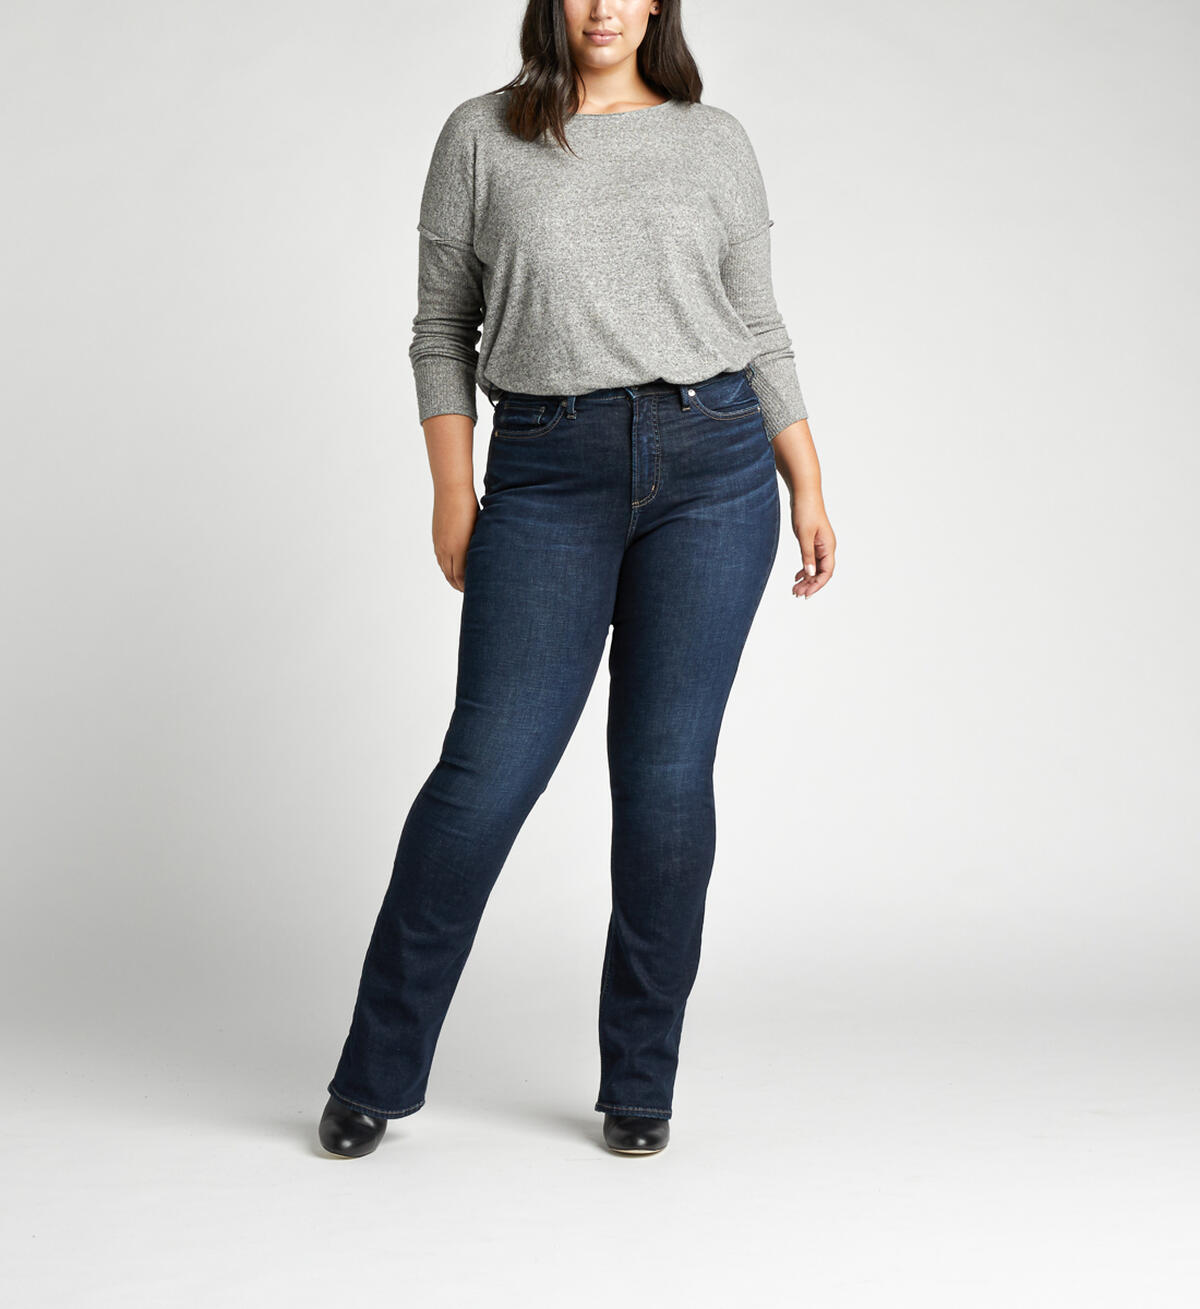 Calley Super High Rise Slim Bootcut Plus Size Jeans, , hi-res image number 0